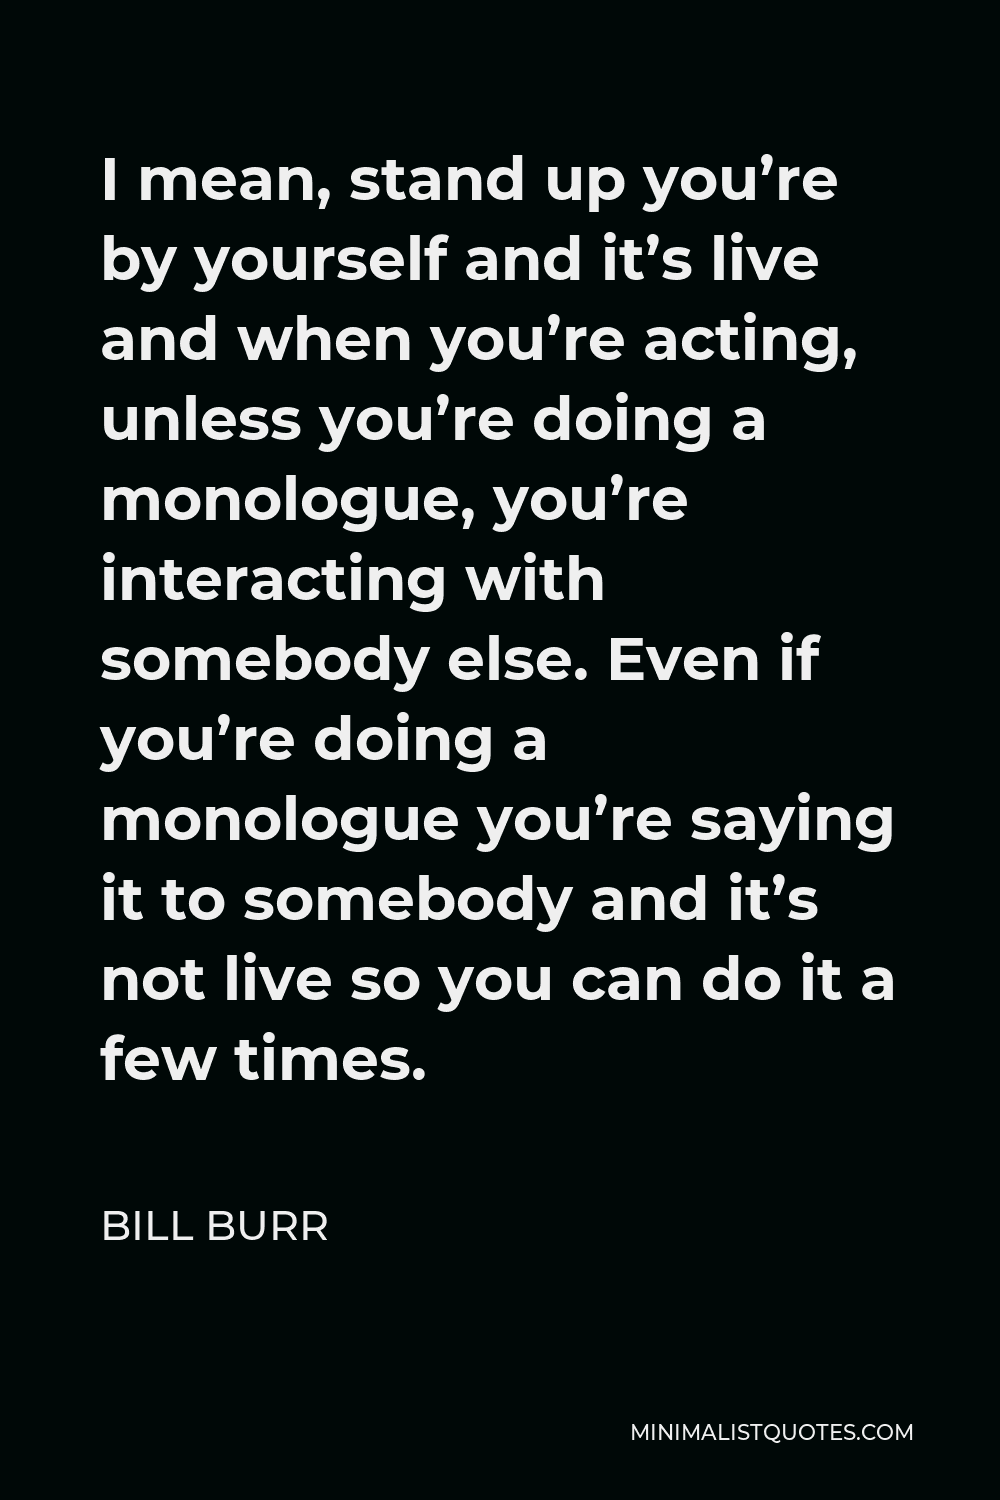 Bill Burr Quote - I mean, stand up you’re by yourself and it’s live and when you’re acting, unless you’re doing a monologue, you’re interacting with somebody else. Even if you’re doing a monologue you’re saying it to somebody and it’s not live so you can do it a few times.